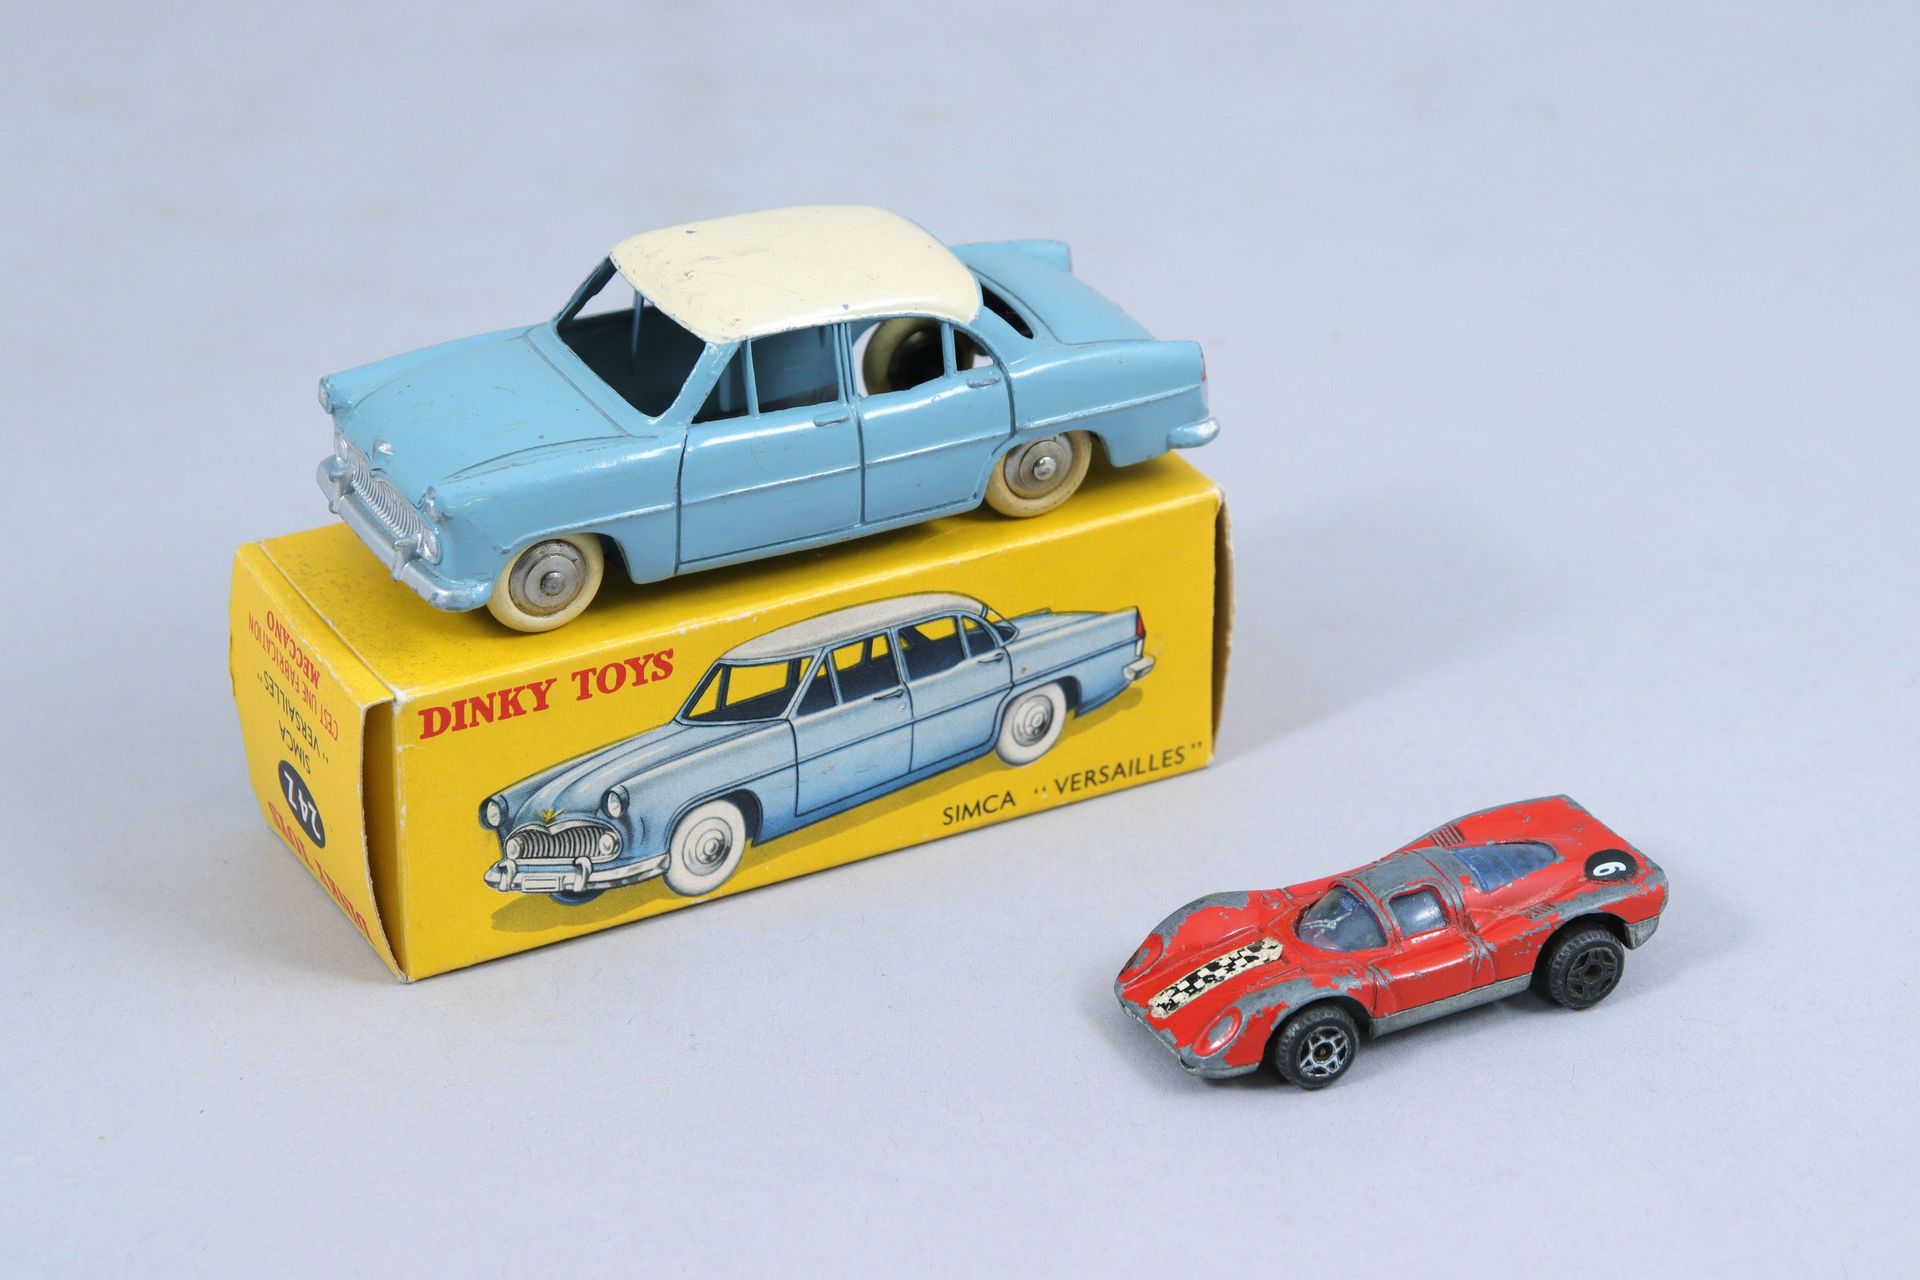 Null Dinky Toys Simca Versailles Made in France, Meccano 24Z.蓝色，白色屋顶。在它的盒子里。 联合：&hellip;